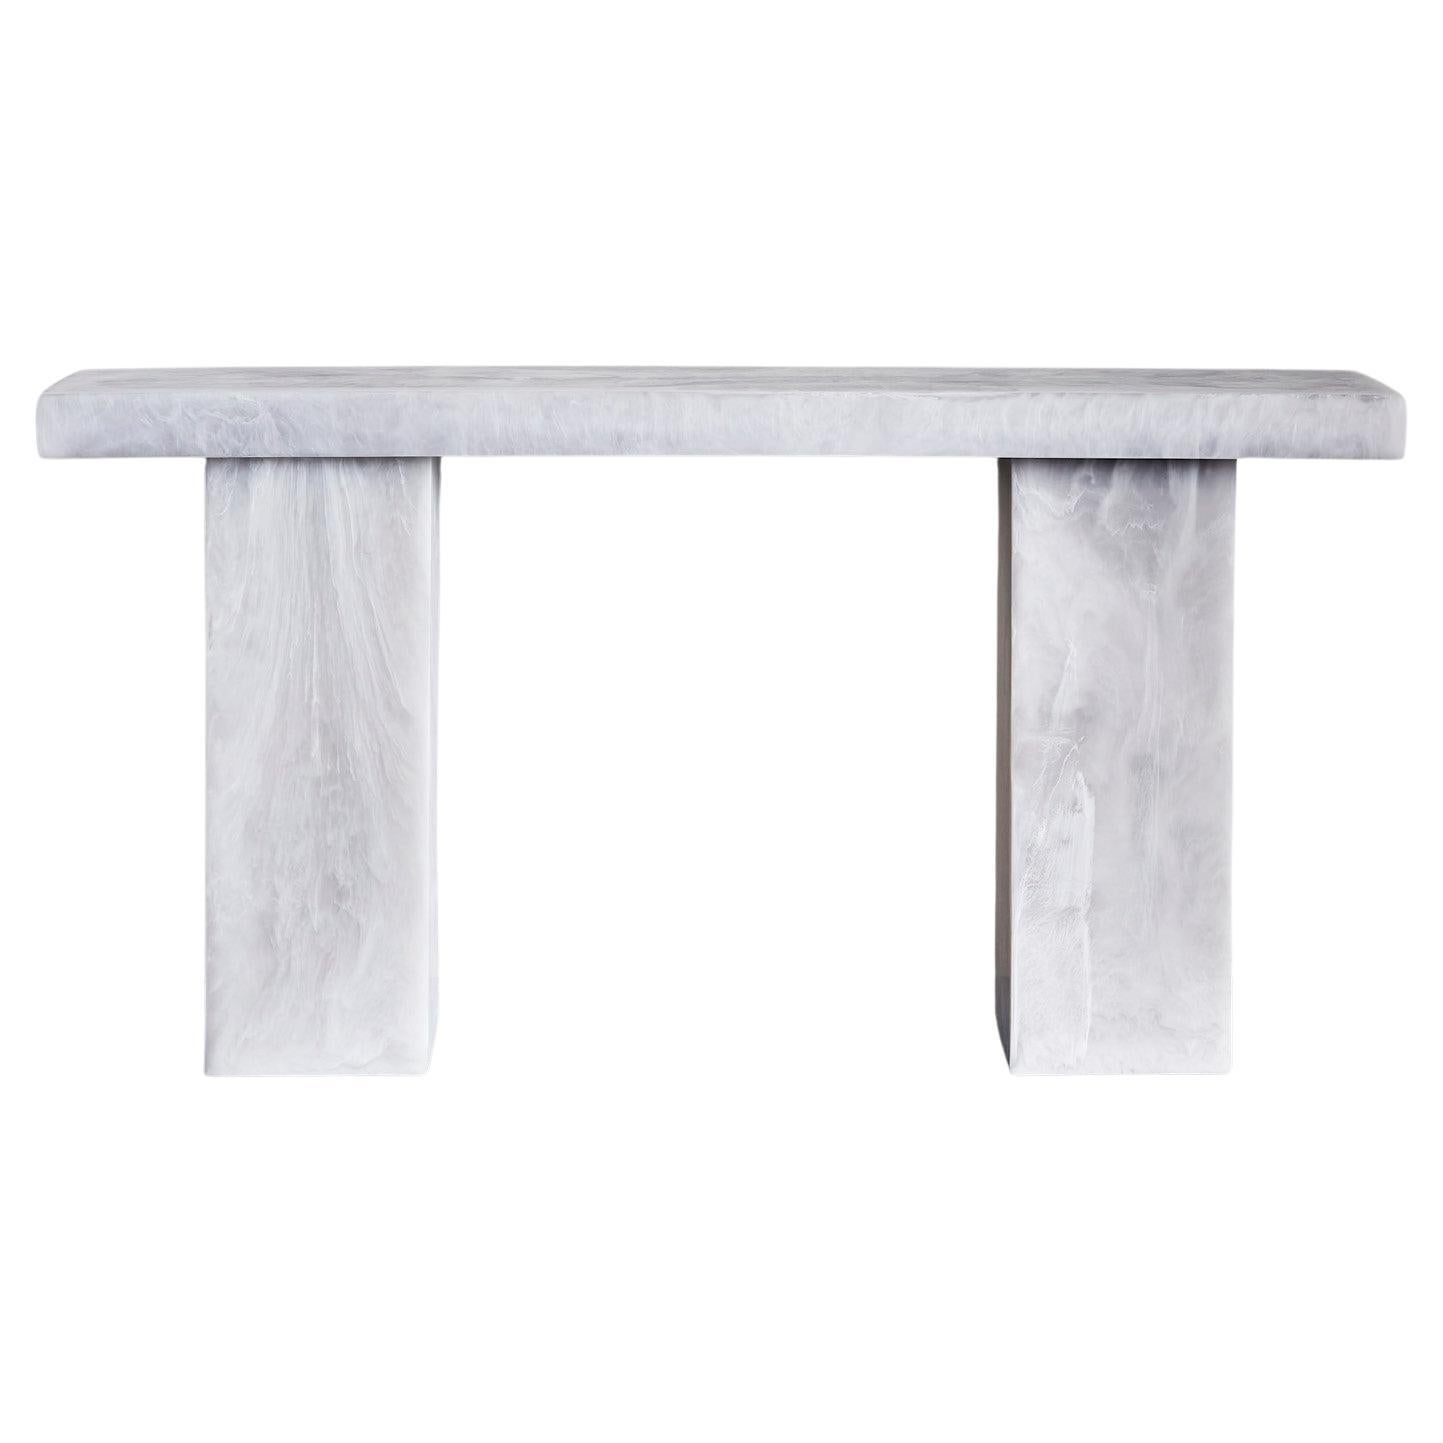 Studio Sturdy Lions Console Table – White Marble Resin